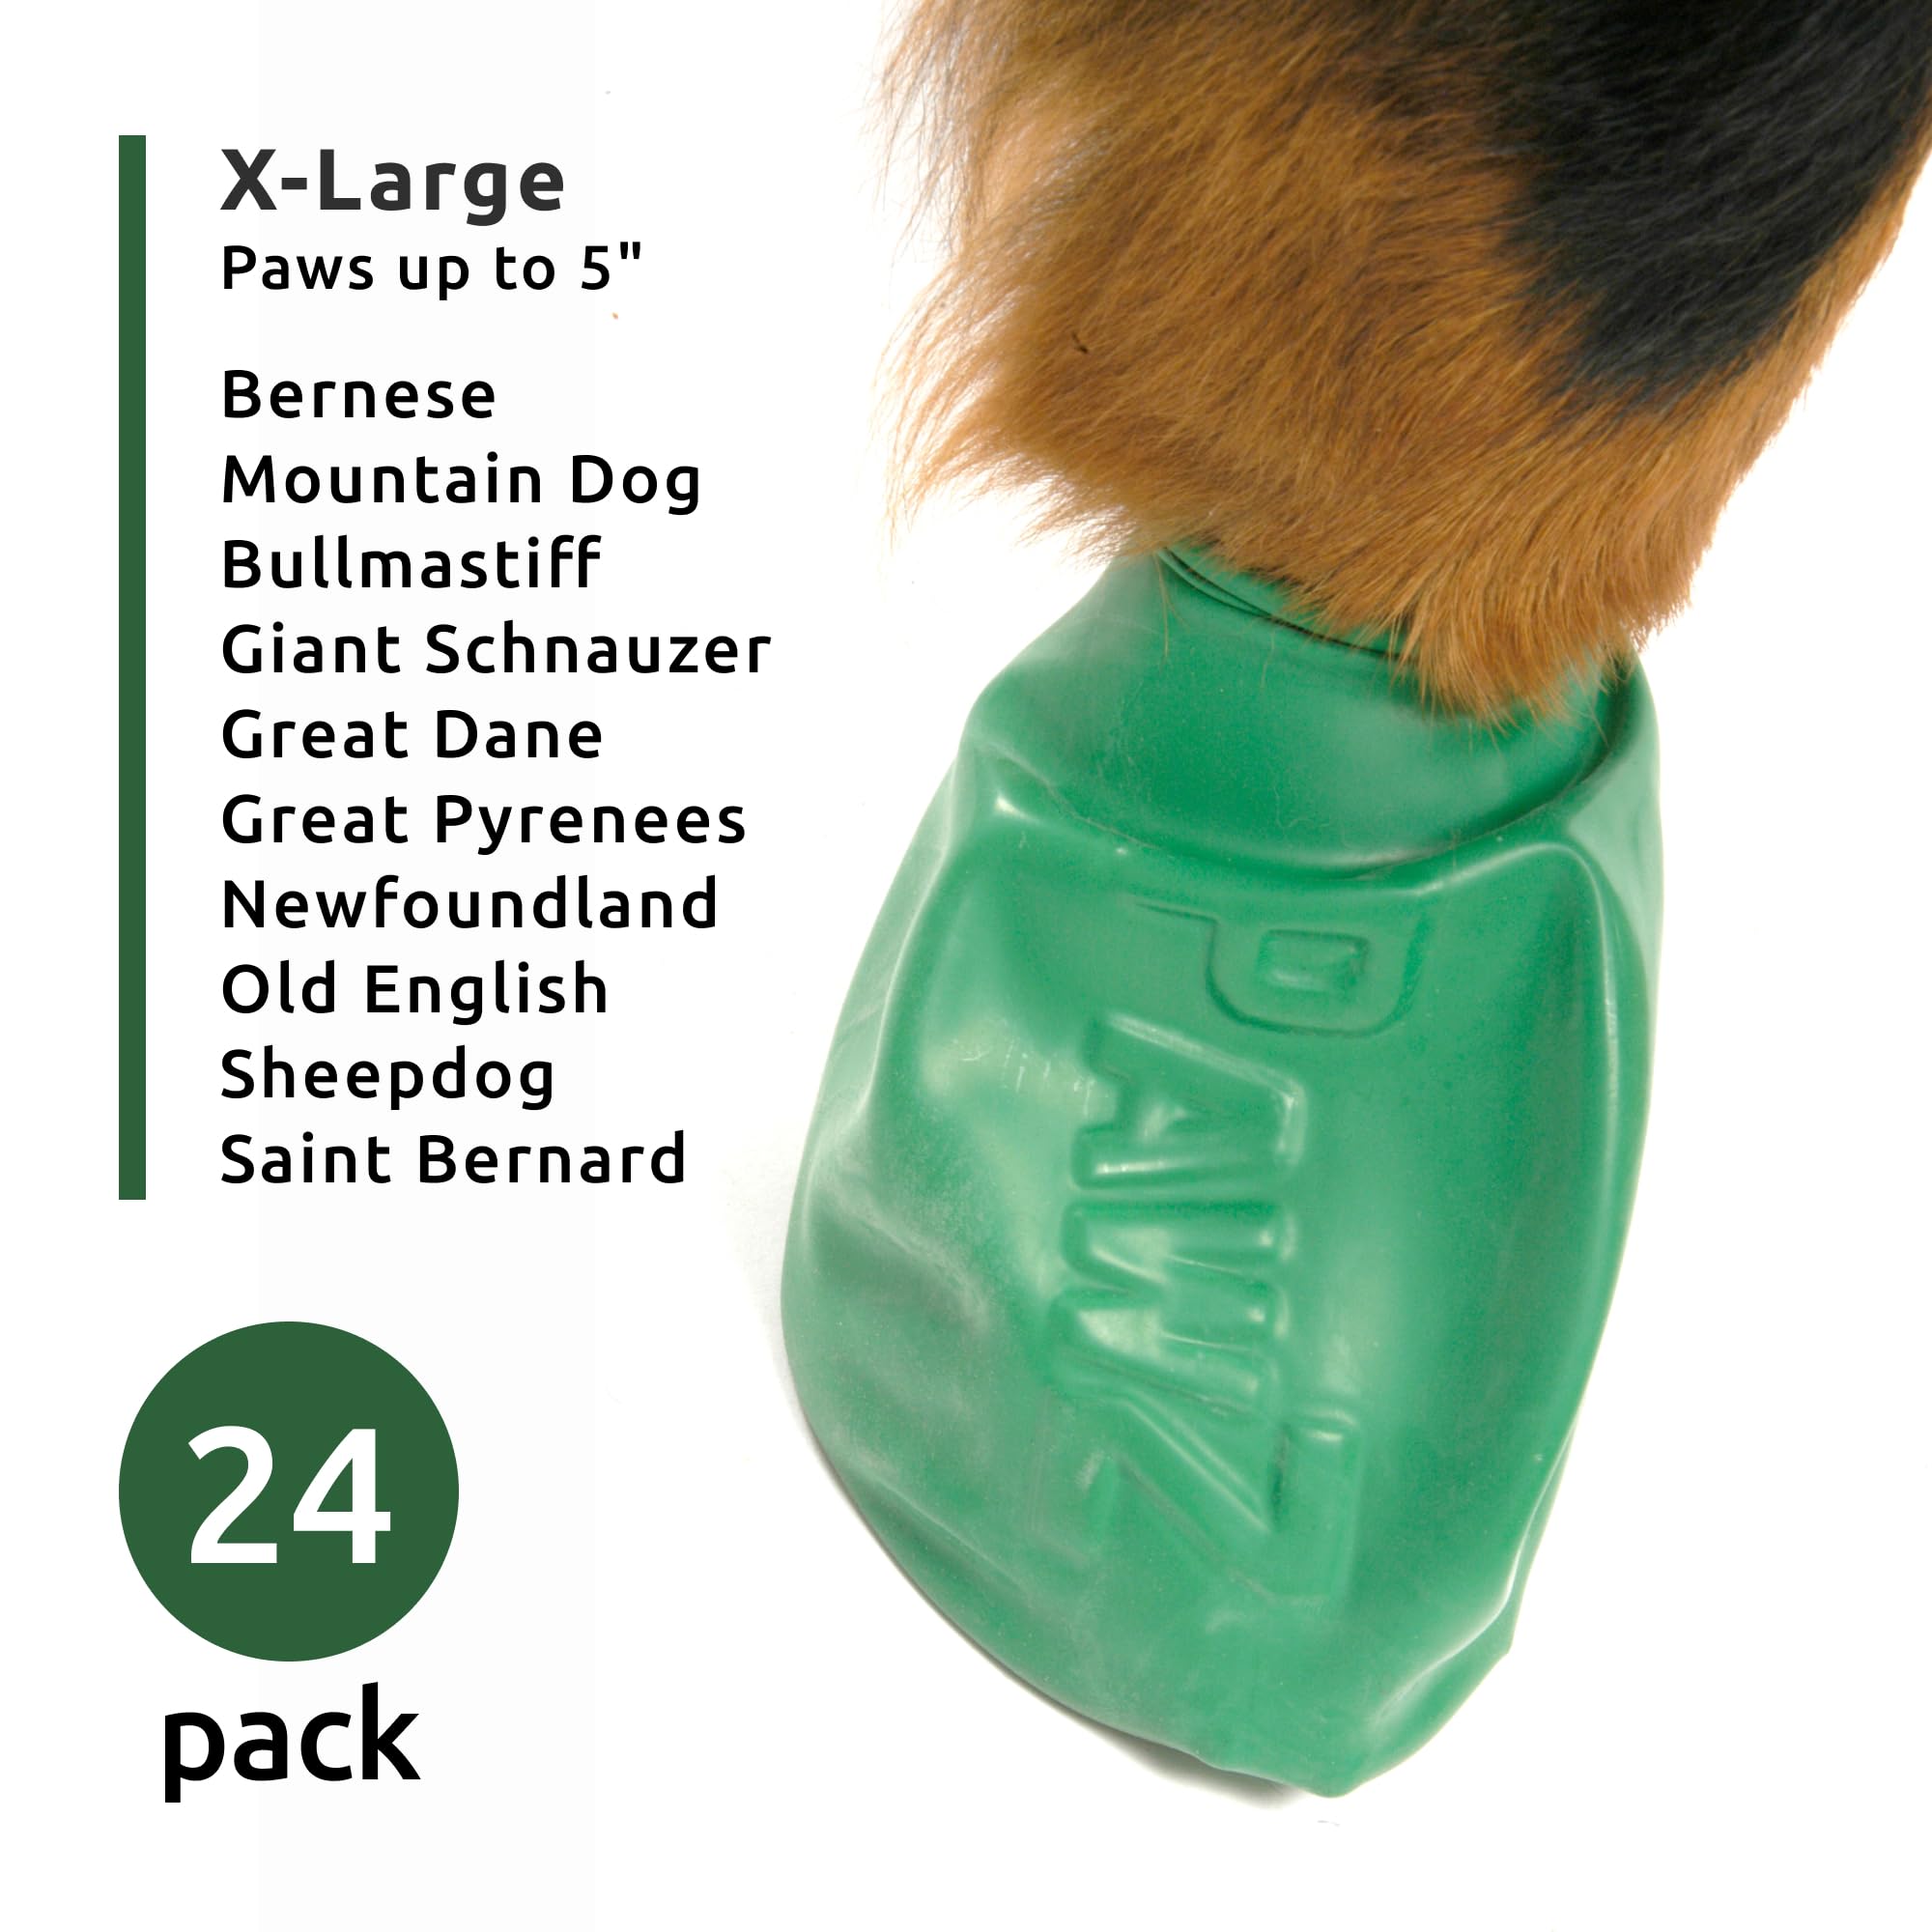 Pawz Waterproof Disposable and Reusable Rubberized Dog Boots - Dark Green - X-Large - 12 Pack  